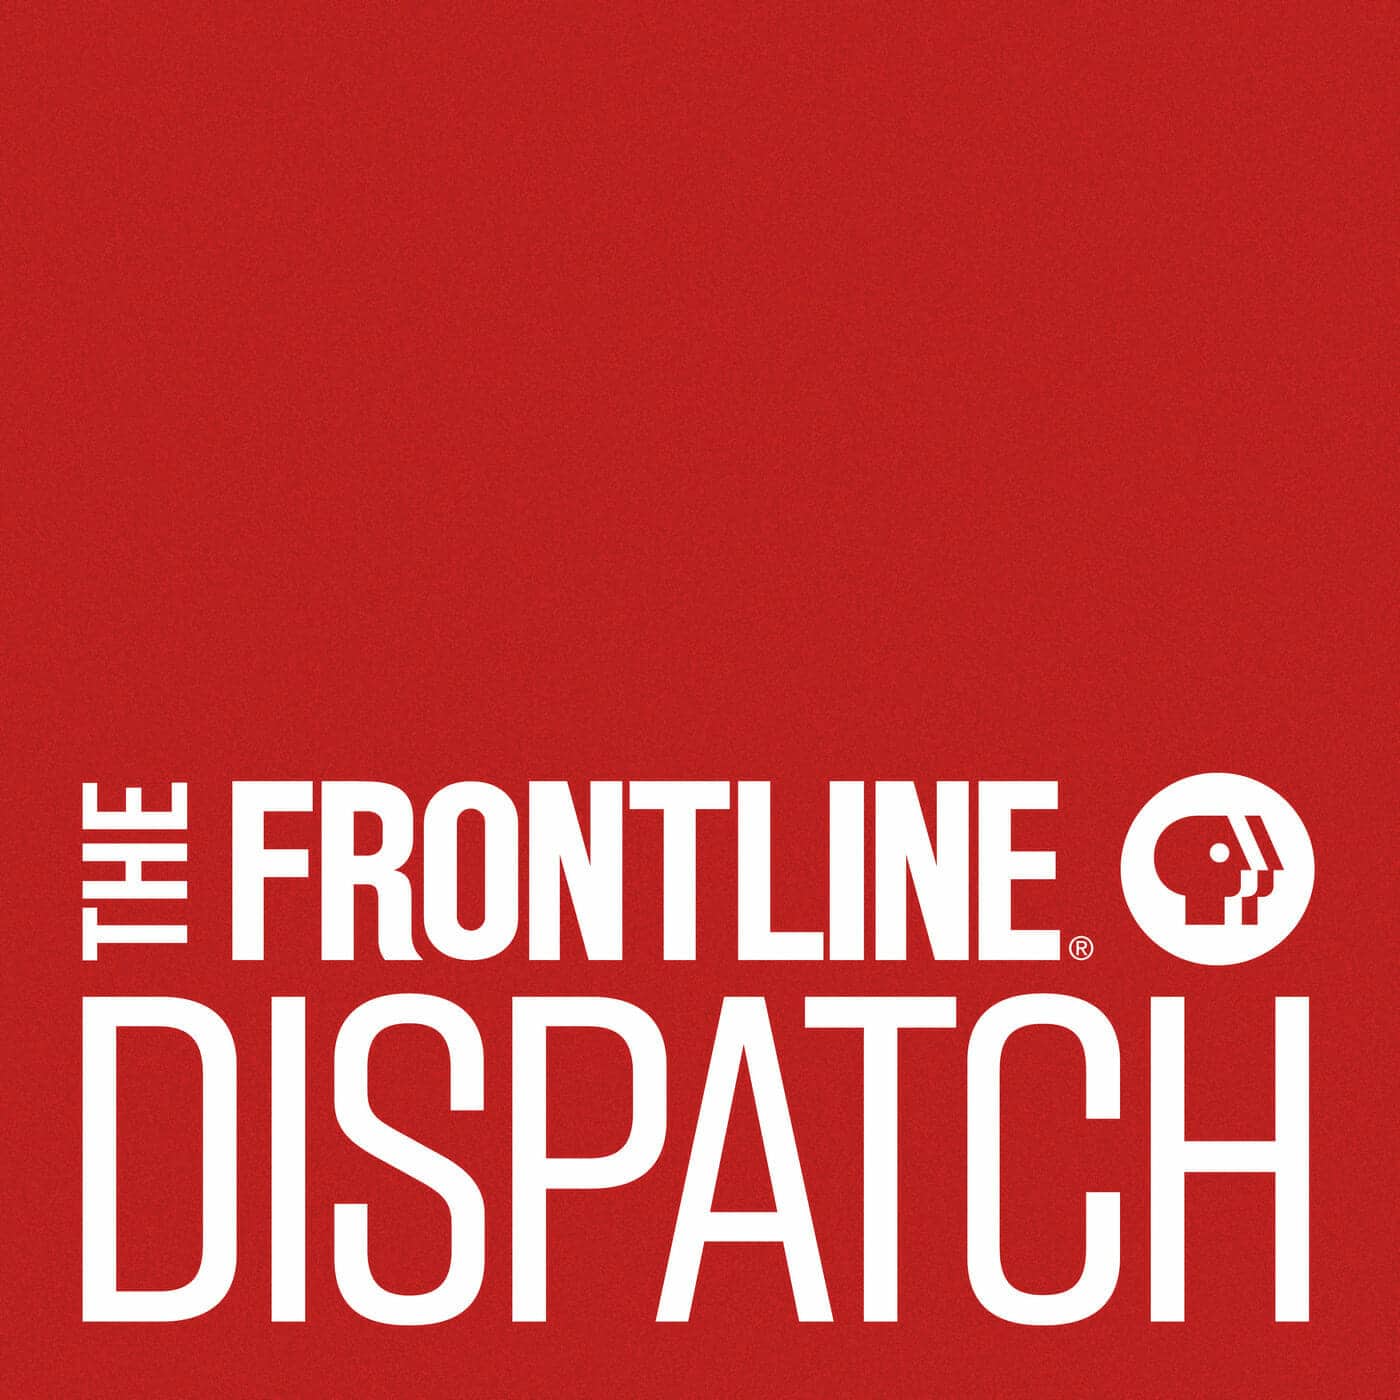 educational-podcasts-frontline